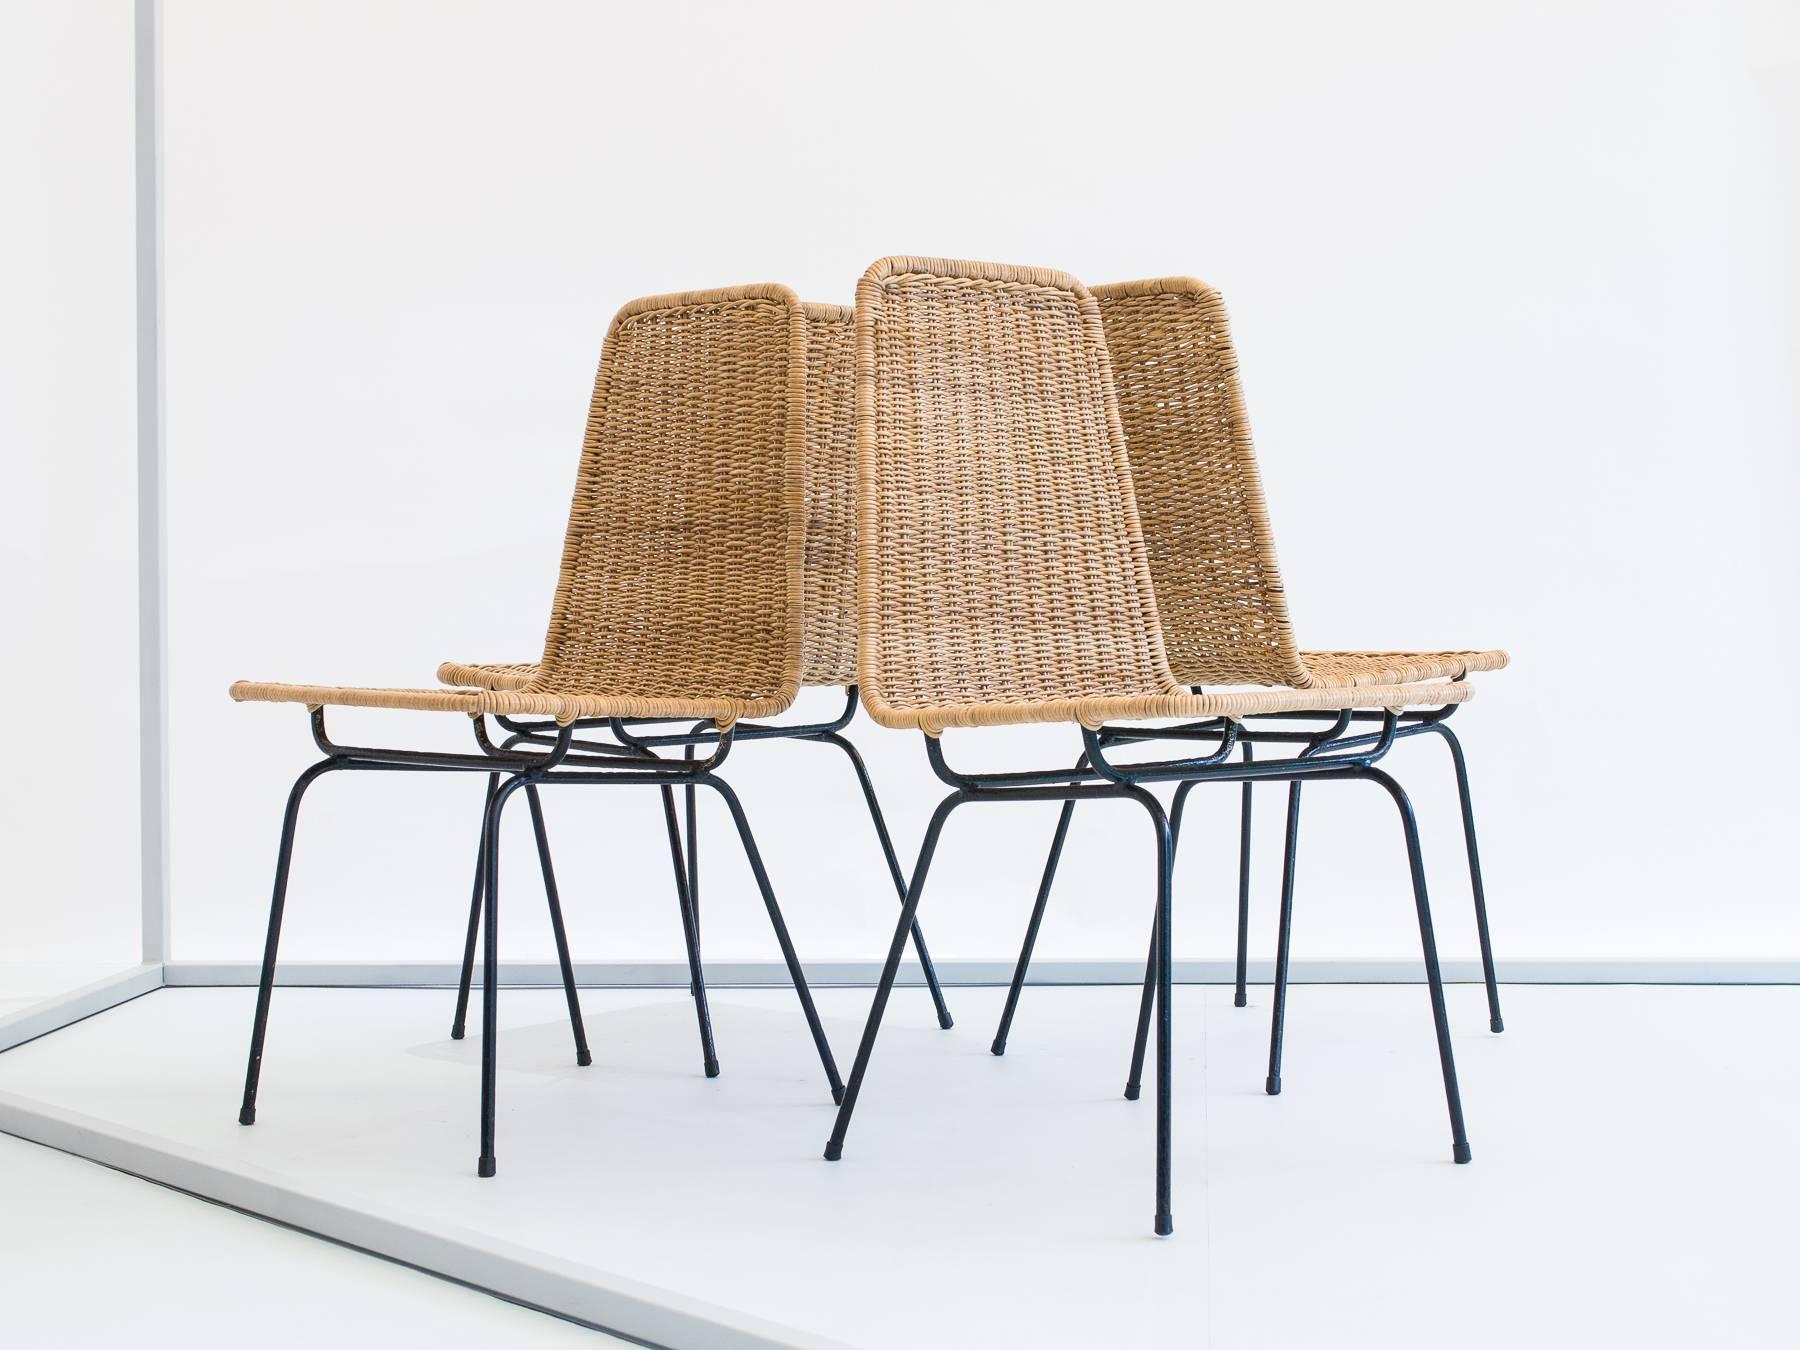 Classic wrought iron chairs designed by Hauner and Eisler, produced by Forma S/A. Original reed was lost to termites, so the reed has been fully replaced with natural reed from the Amazon Jungle.